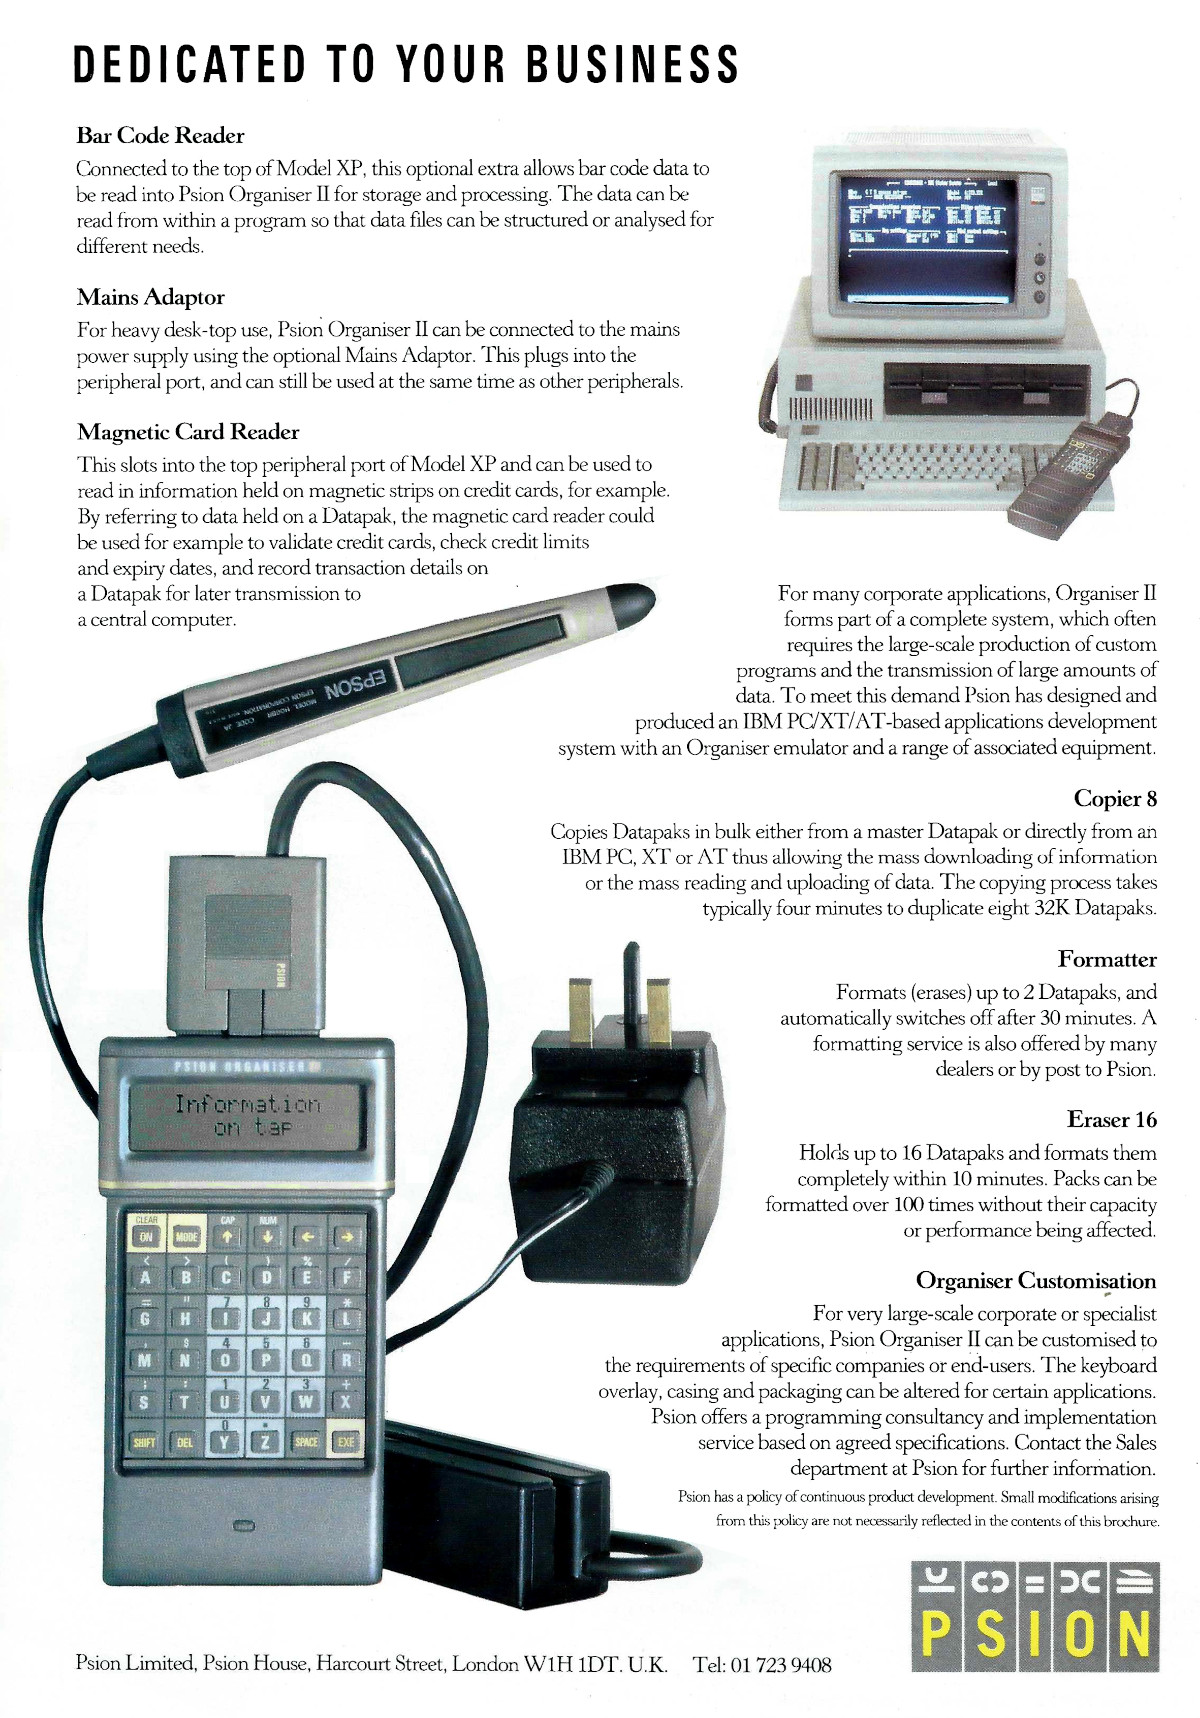 Some of the peripherals available for the Organiser II, as seen in a glossy eight-page booklet inserted into June 1986's Personal Computer World